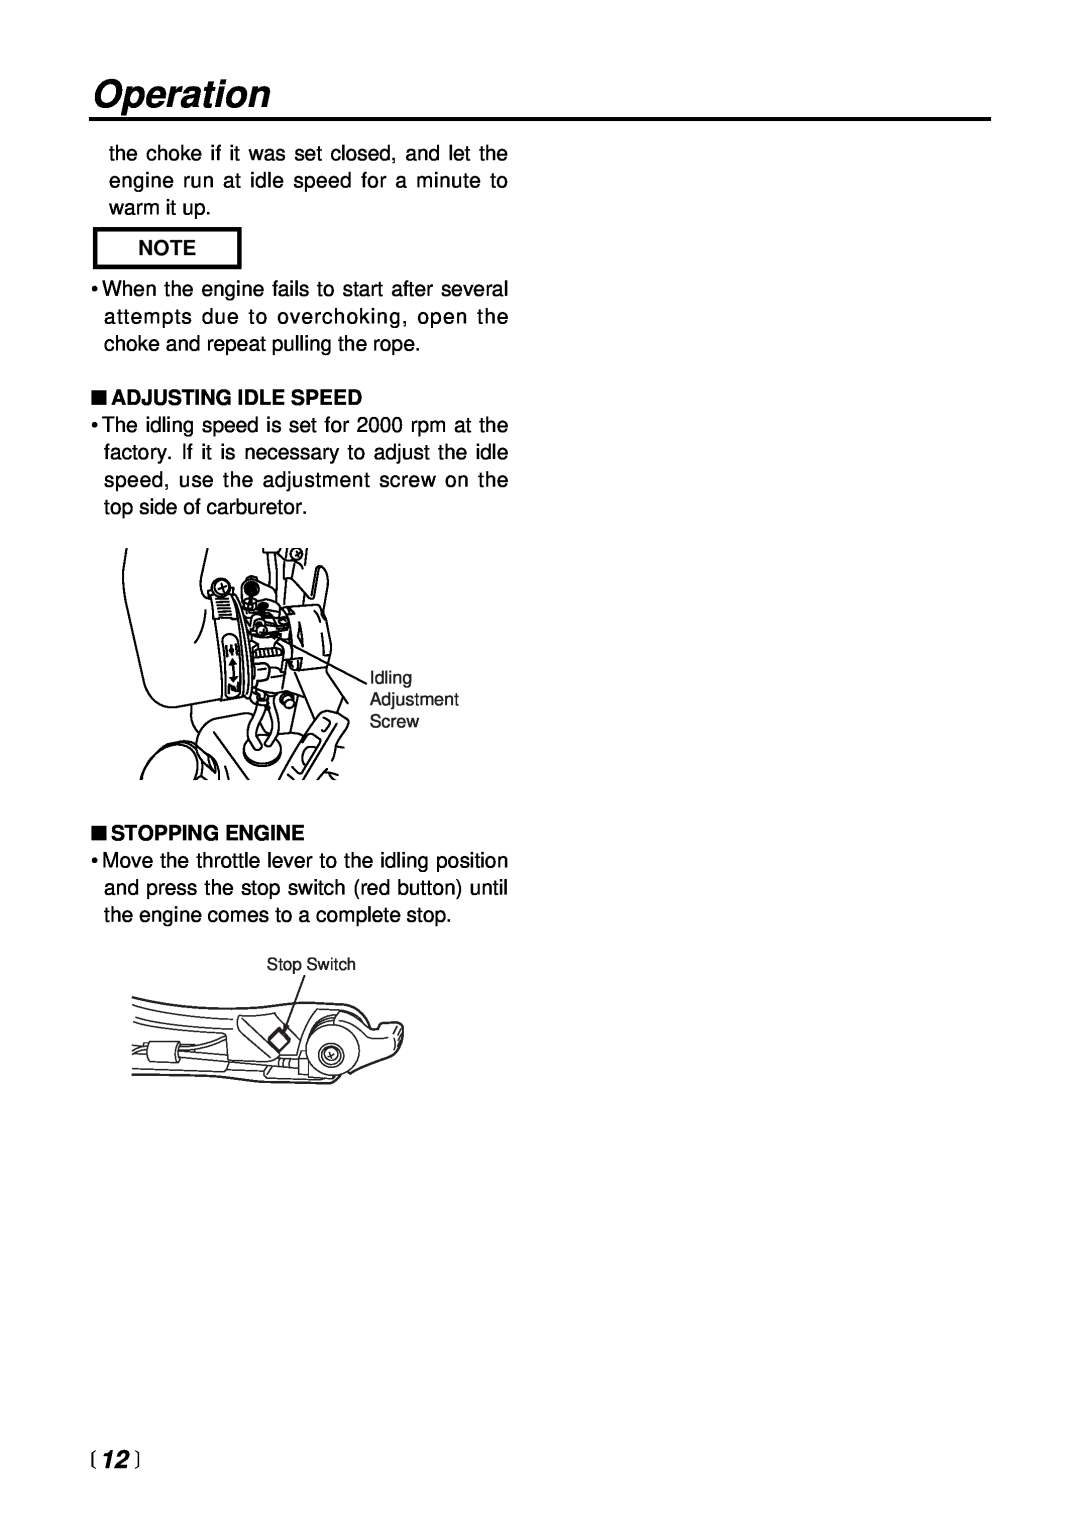 RedMax EB7000 manual Operation,  12 , Adjusting Idle Speed, Stopping Engine 